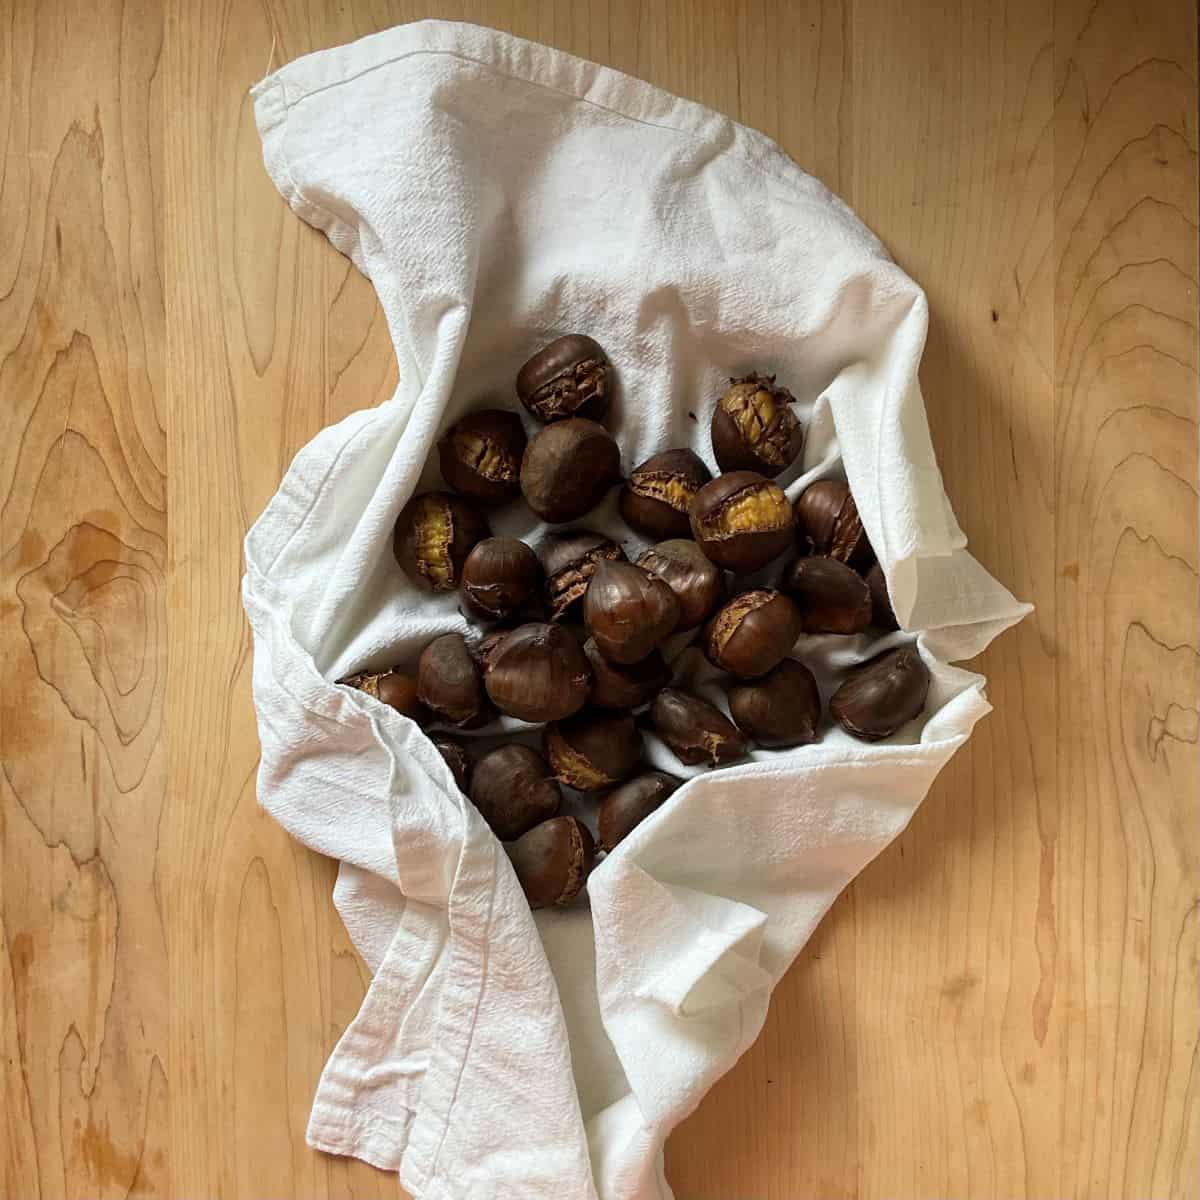 Roasted chestnuts in a tea towel.